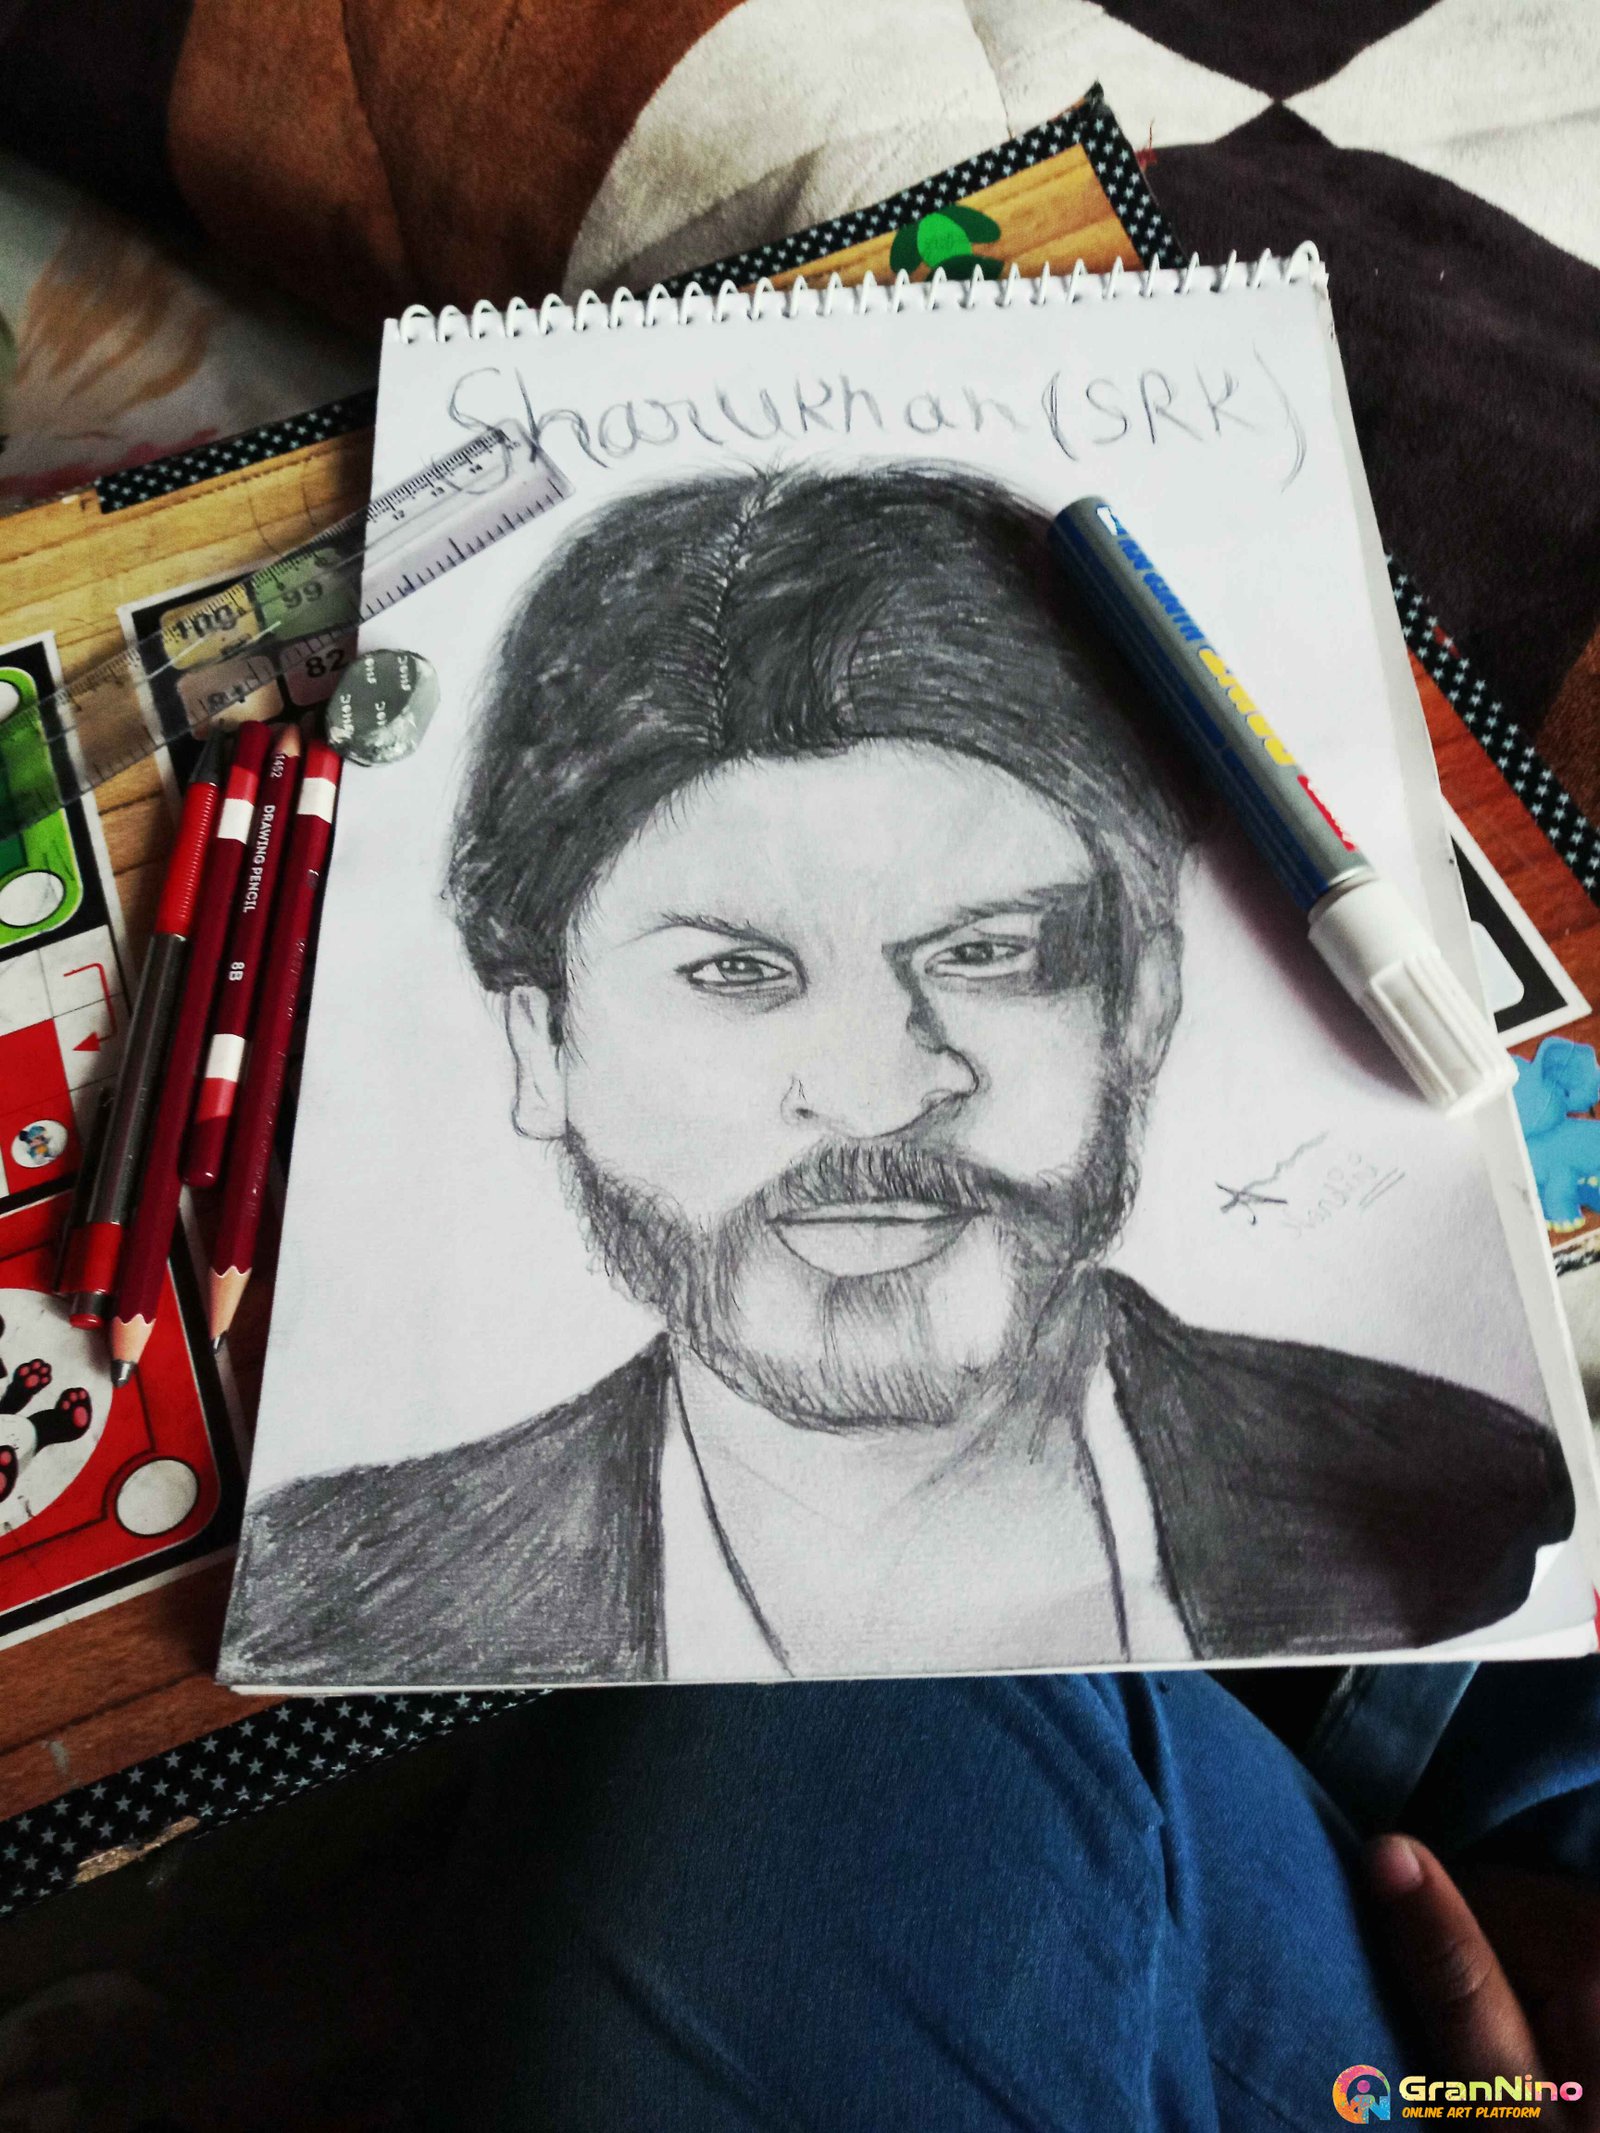 Draw of Sketches Shahrukh Khan Pencil Sketch Easy  Popular actor in India   YouTube